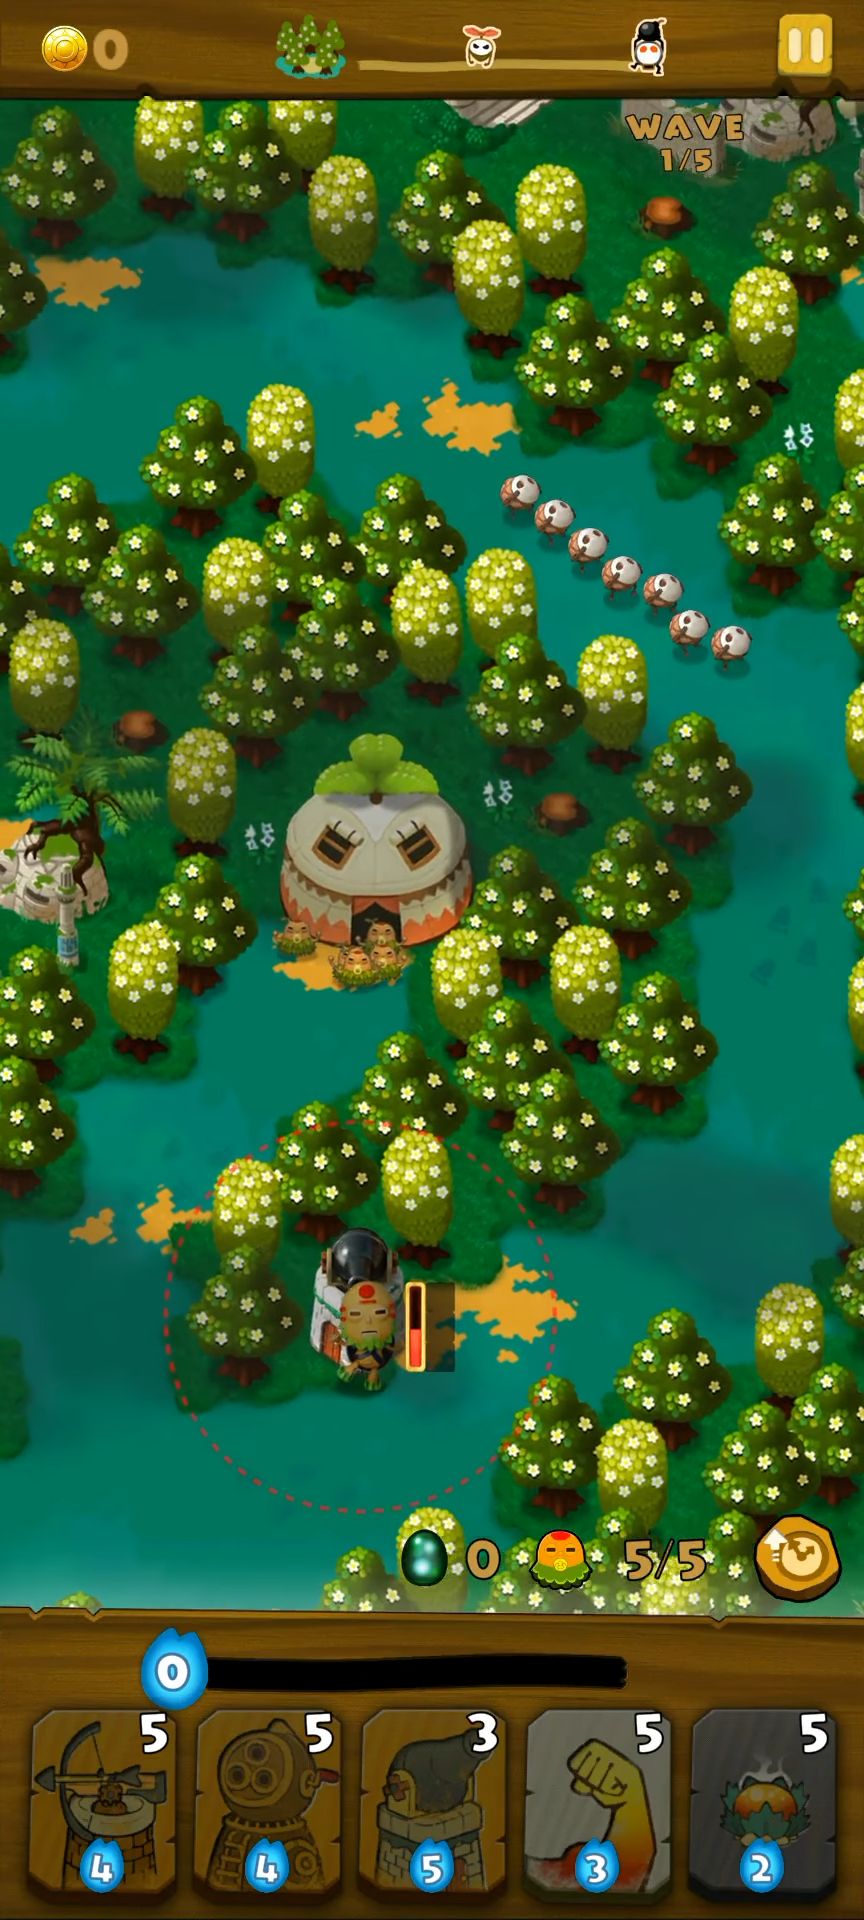 Full version of Android apk app PixelJunk Monsters for tablet and phone.